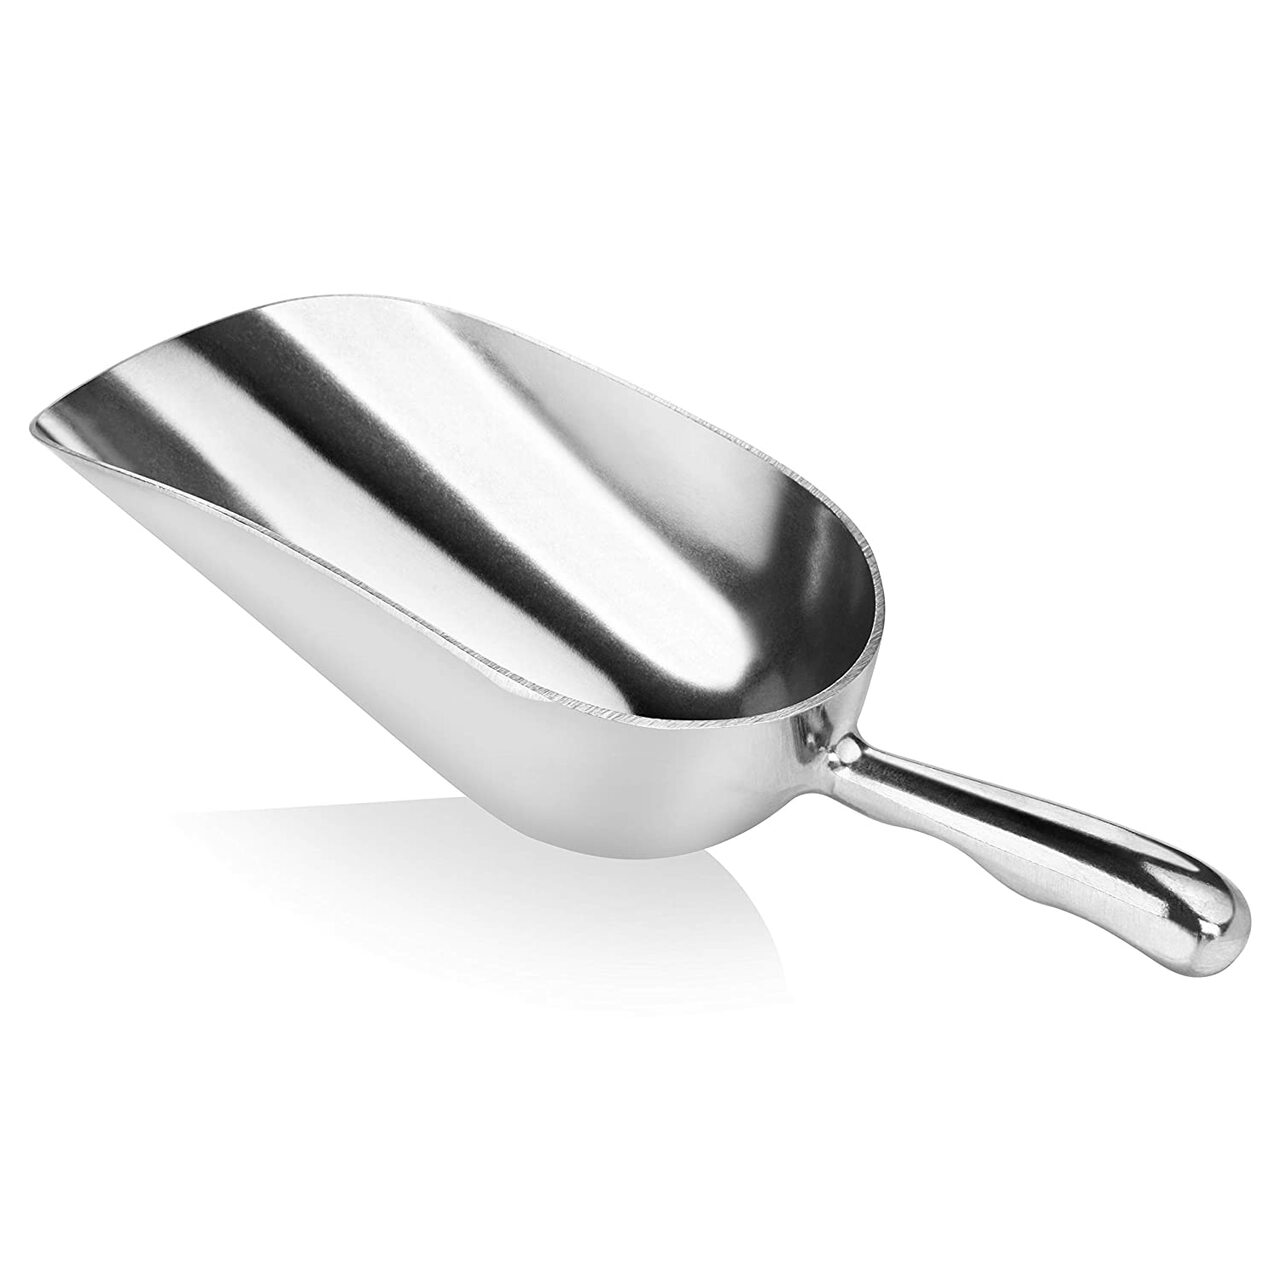 Large Stainless Steel Dry Ice Scooper